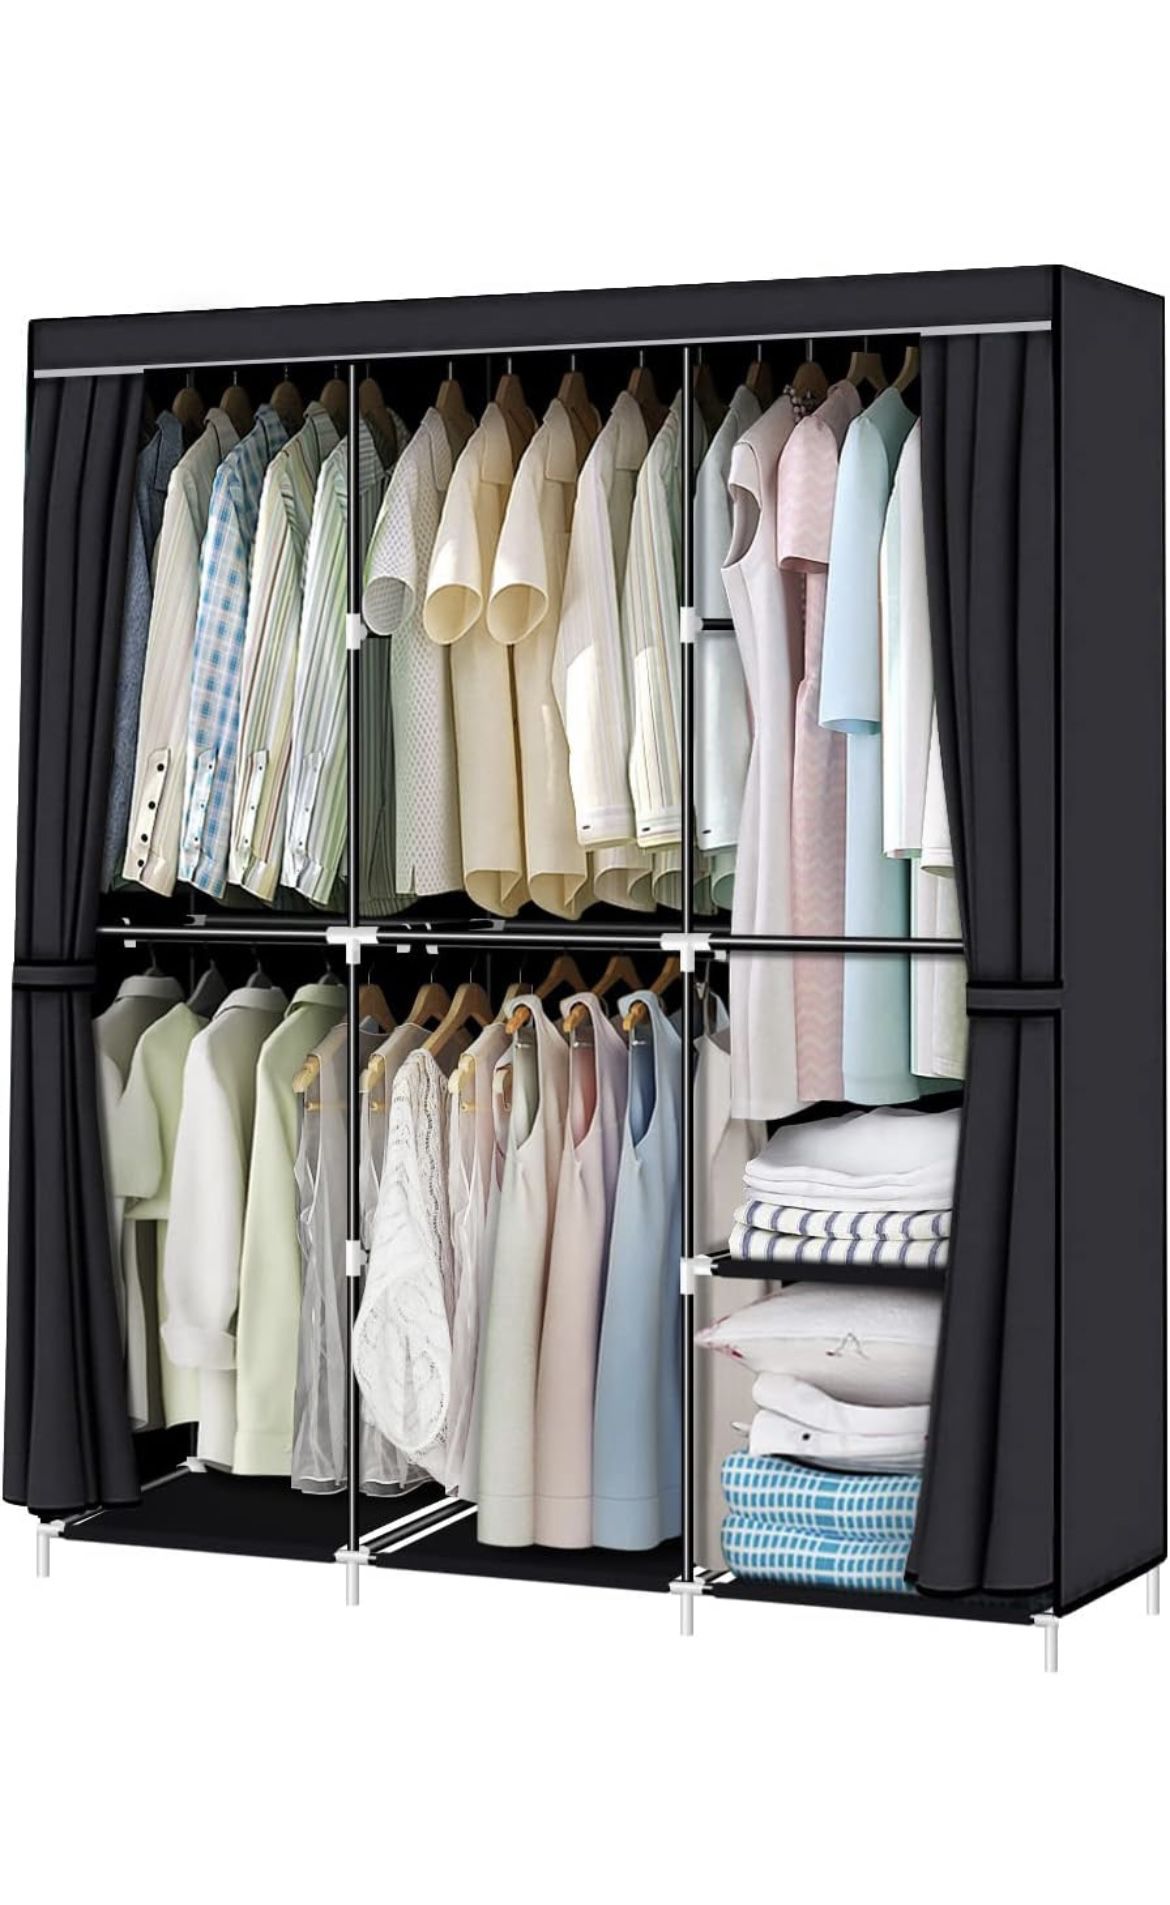 Portable Closet 50 Inch Wardrobe Closet for Hanging Clothes with Non-Woven Fabric Cover and Hanging